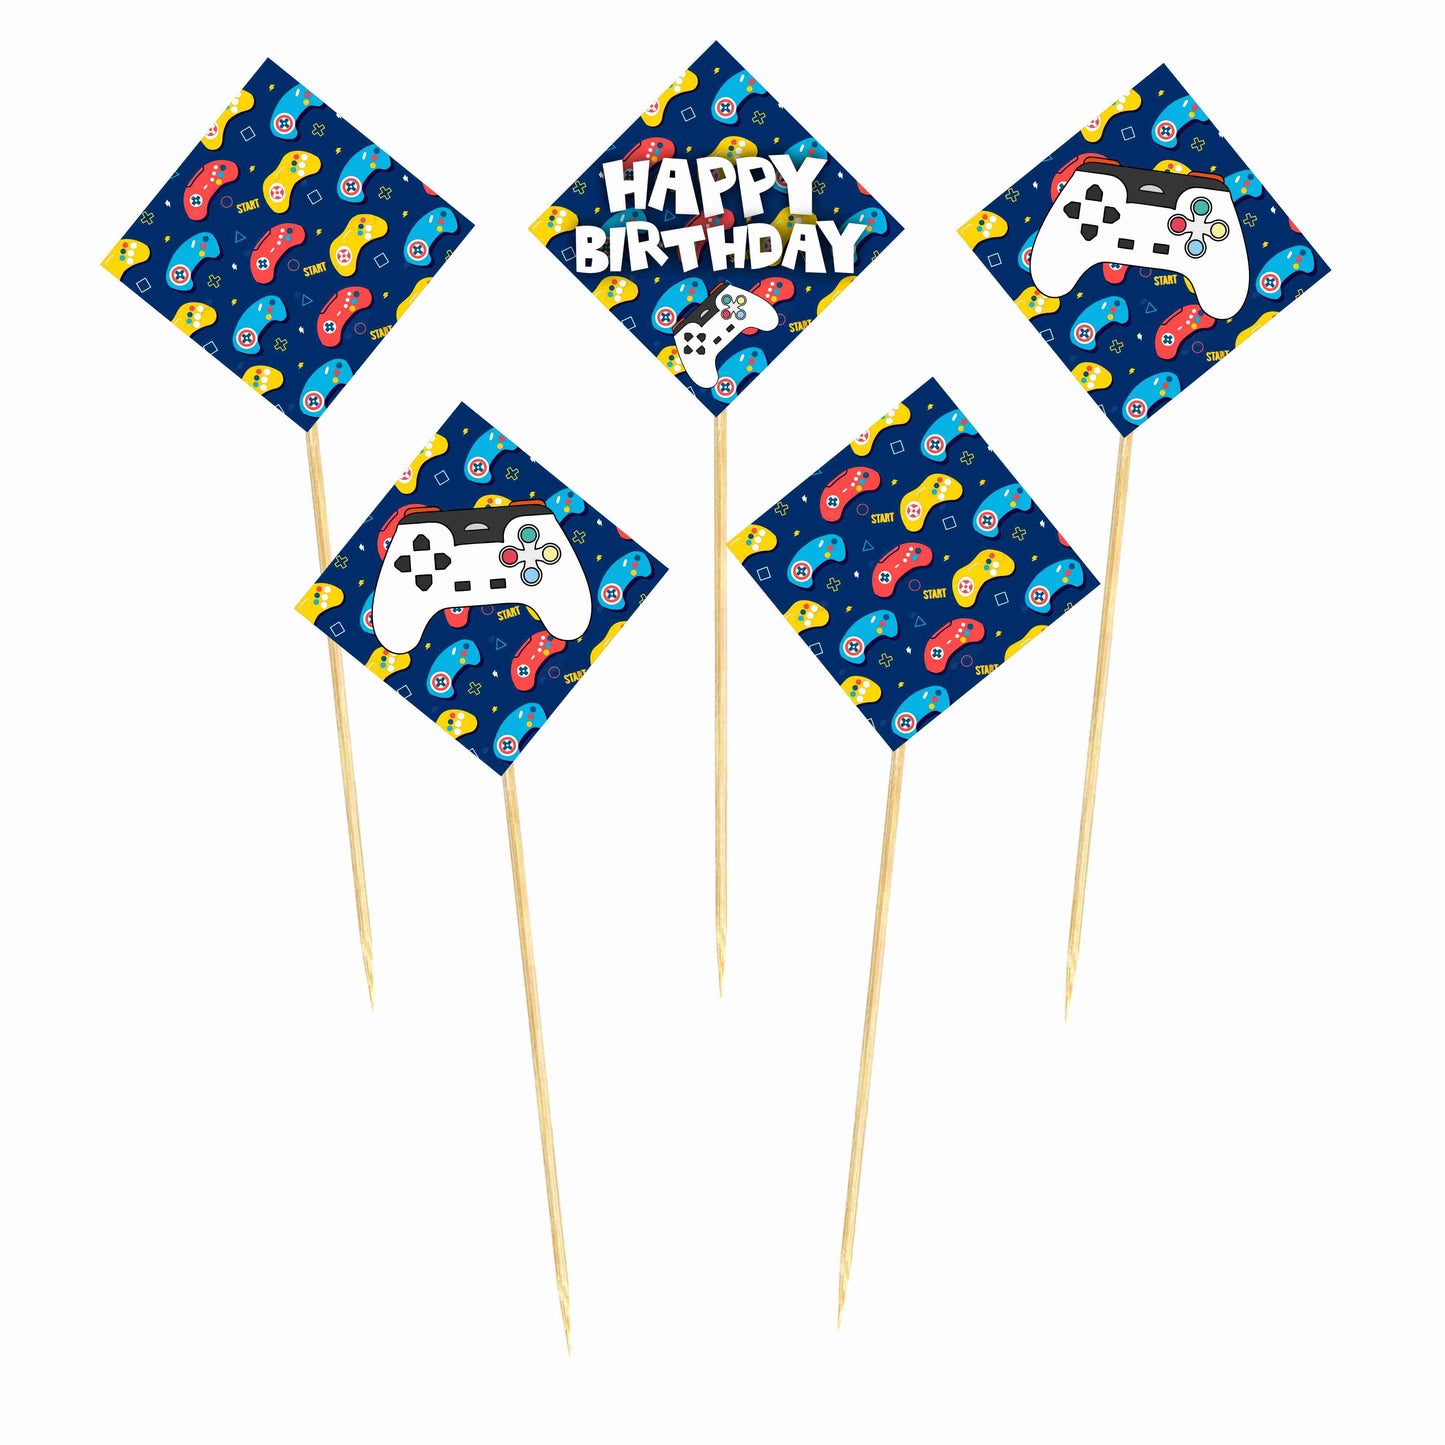 VideoGame Theme Cake Topper Pack of 10 Nos for Birthday Cake Decoration Theme Party Item For Boys Girls Adults Birthday Theme Decor